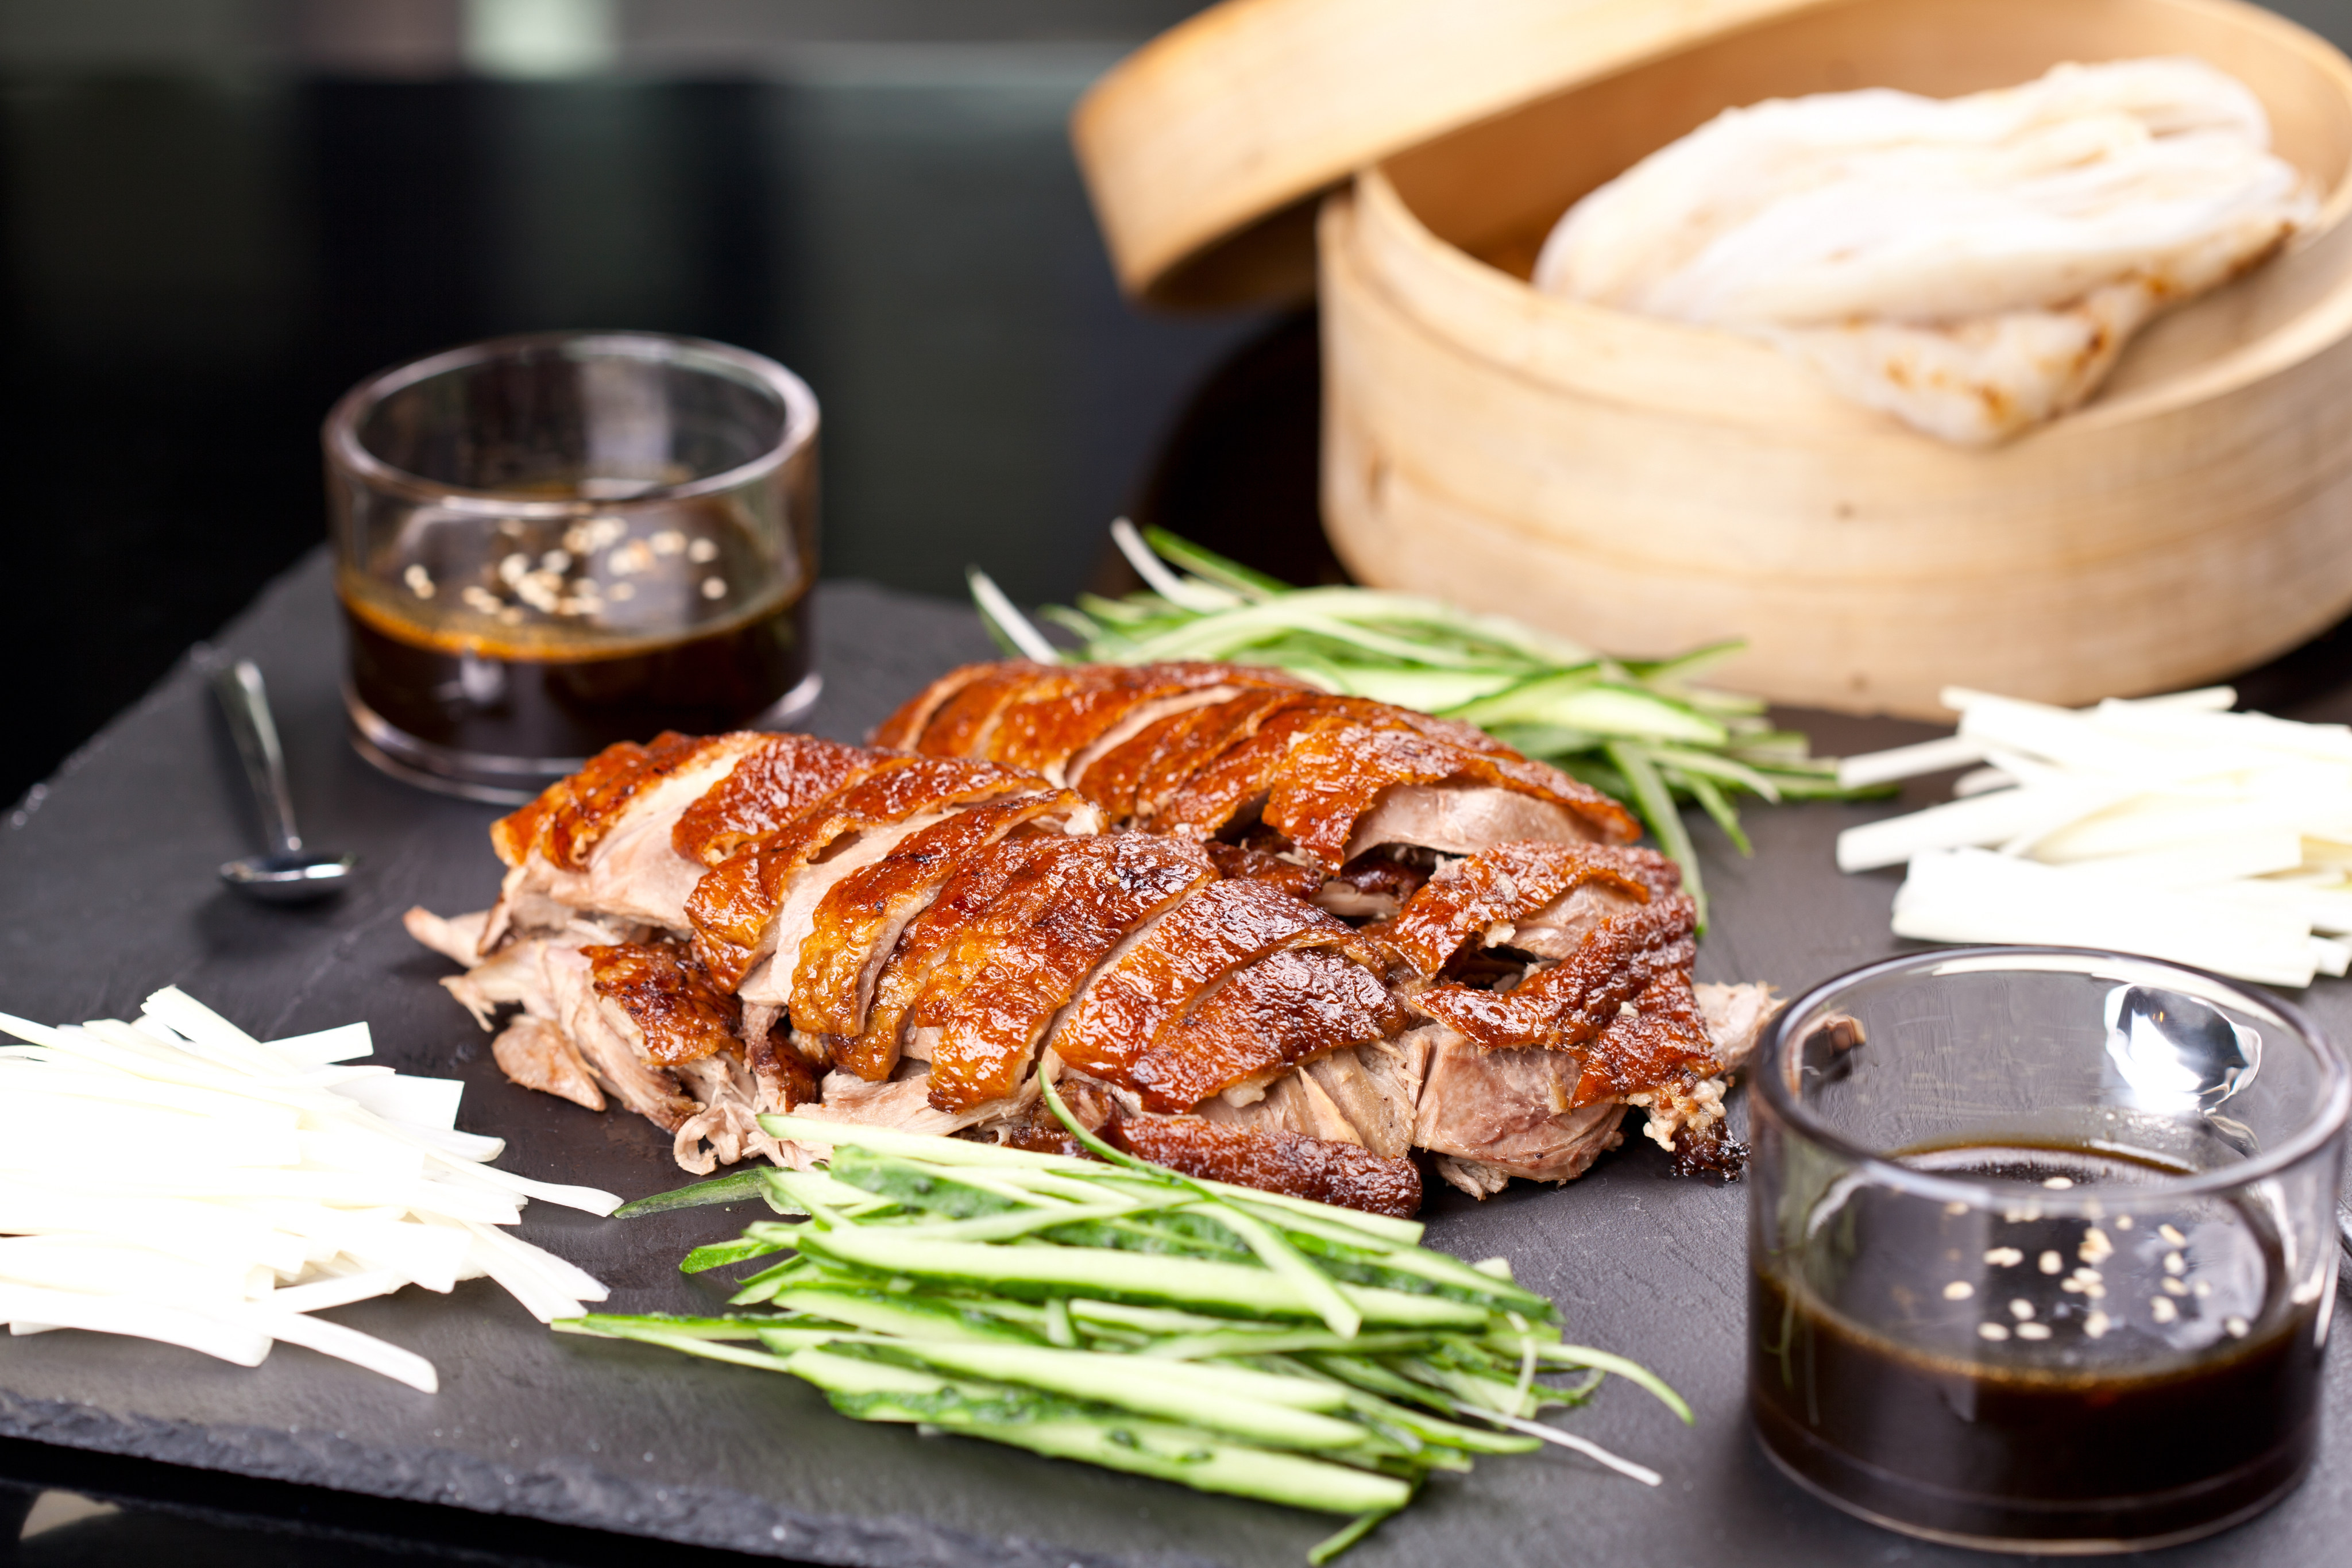 The man told local media he was tempted to order the Peking duck because he thought his grandson would like to try the popular dish. Photo: Shutterstock